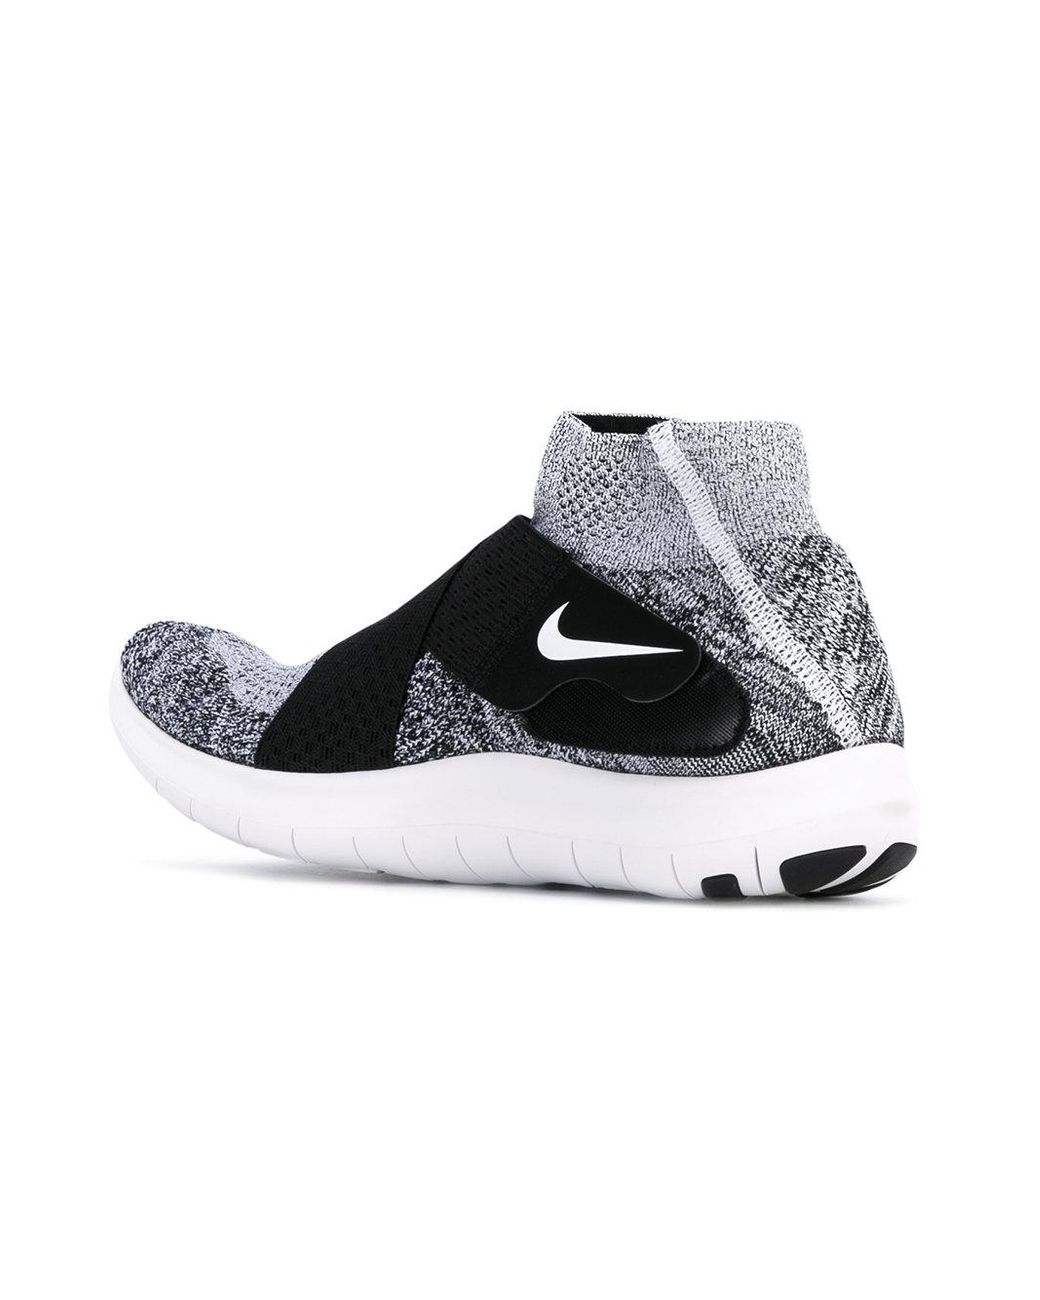 nike with strap across